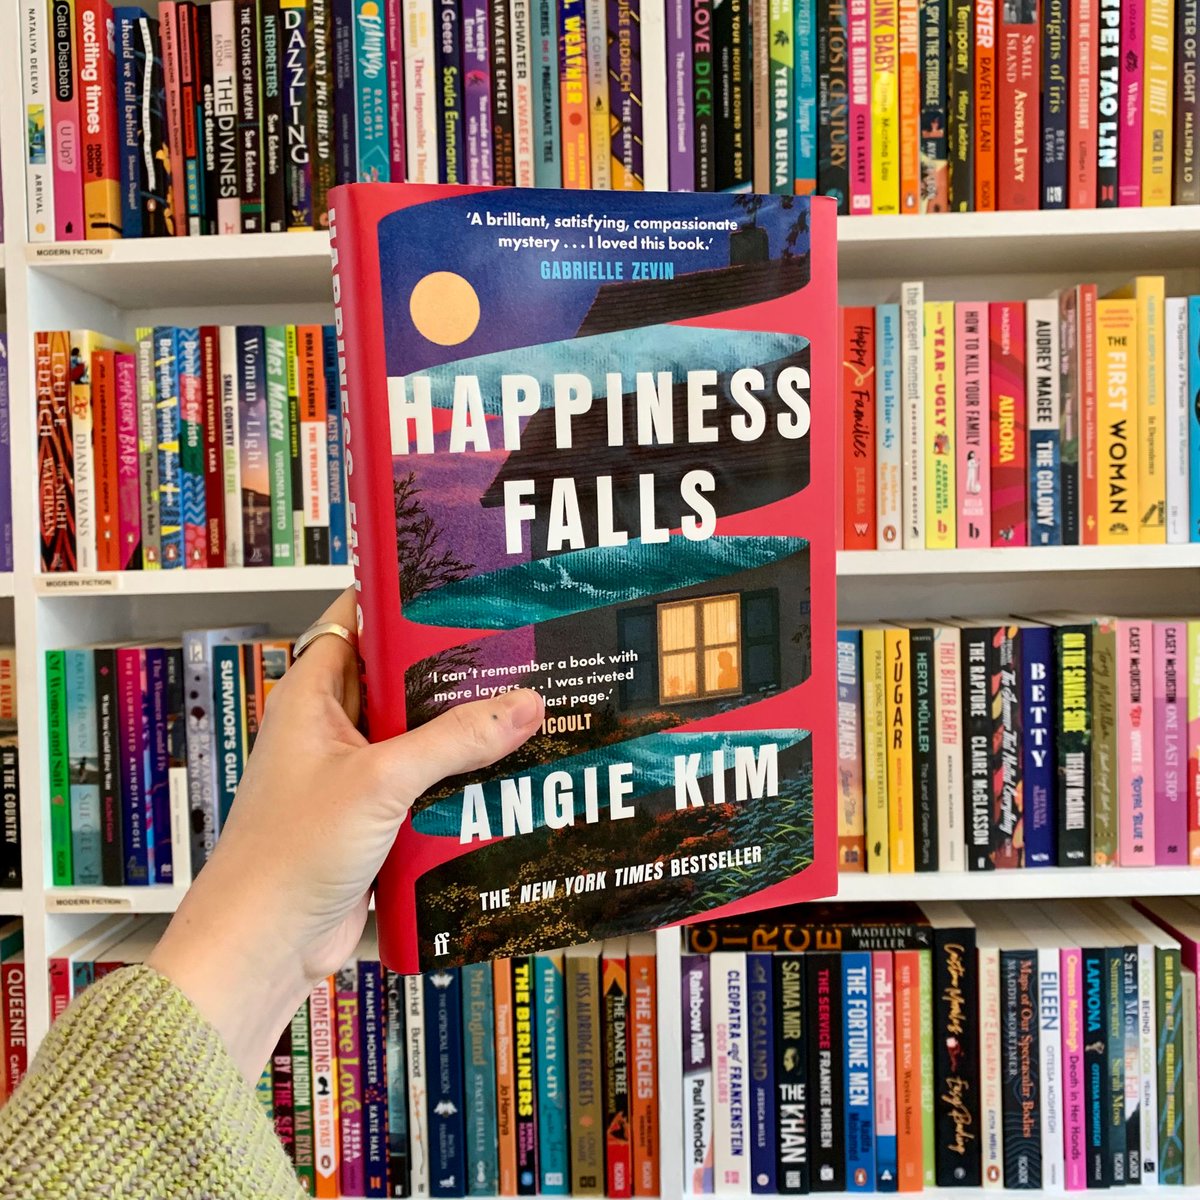 STAFF PICK - Salomée: I was completely gripped from the first line and couldn't put @AngieKimWriter 's book down until the very end. A literary thriller, a unique exploration of immigration, communication, selfhood, body agency and family. A massive 2024 highlight for me!